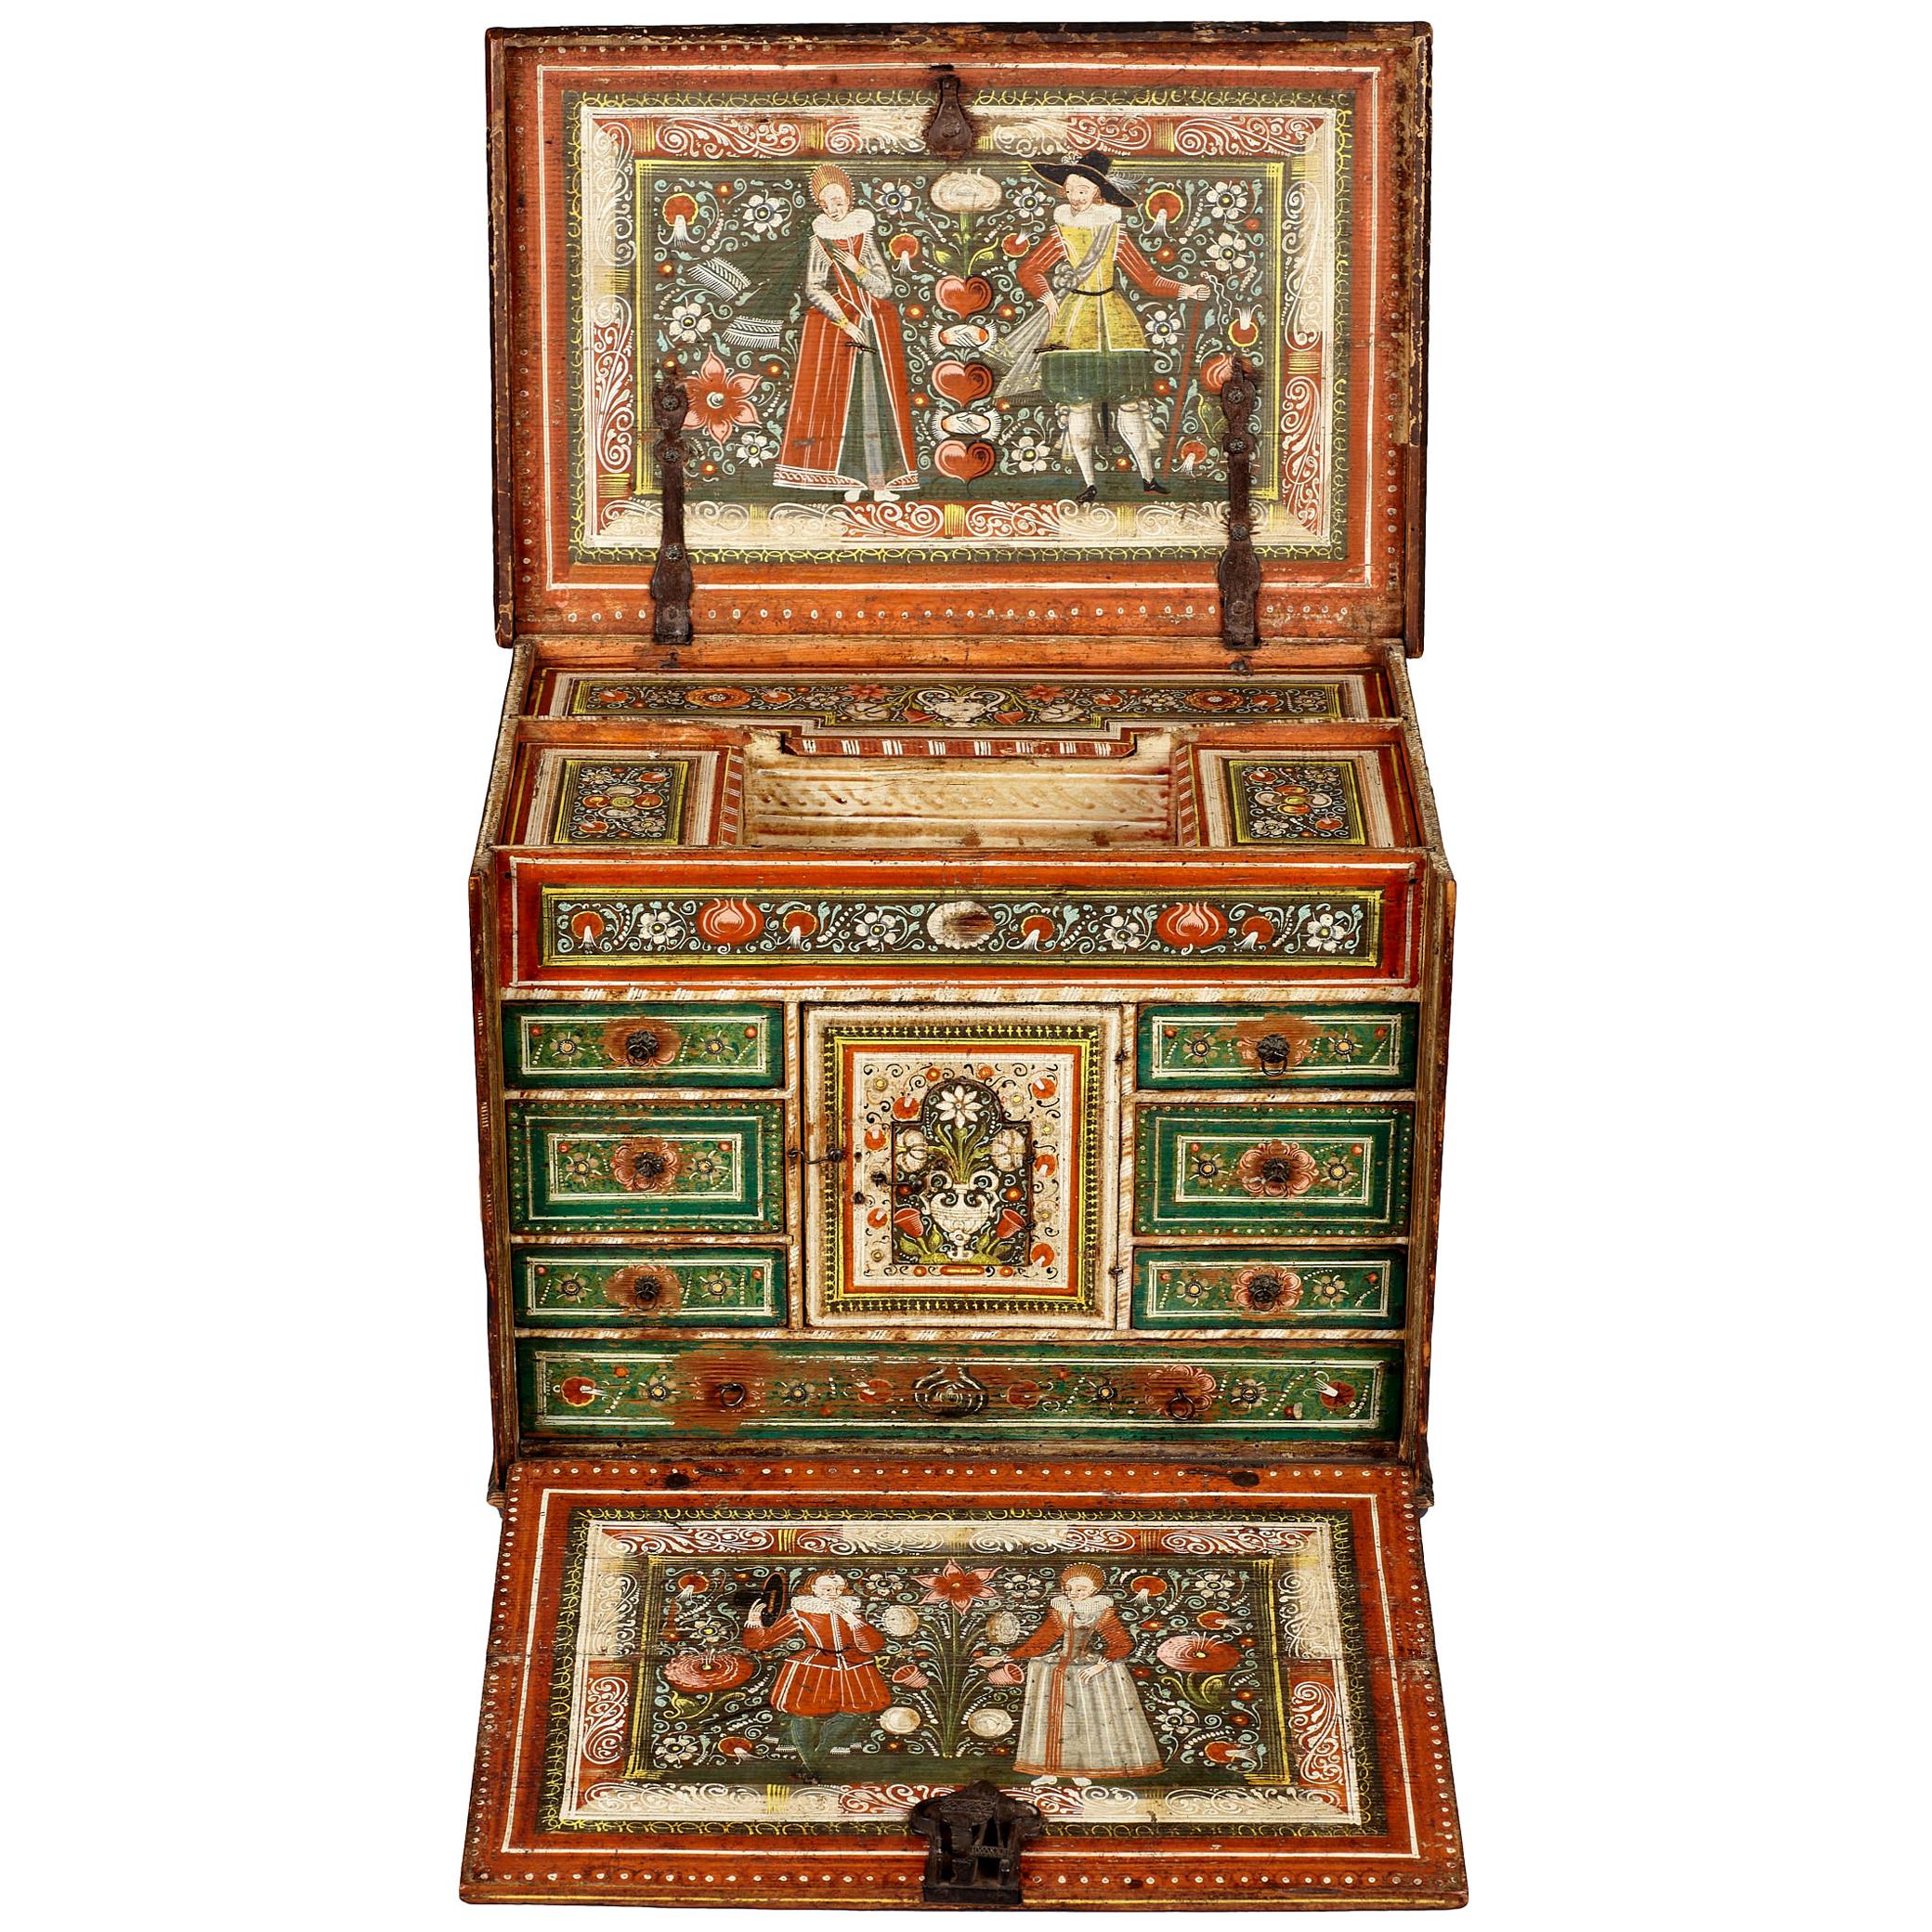 Elizabethan Polychrome Painted Marriage Cabinet, German, circa 1580-1600